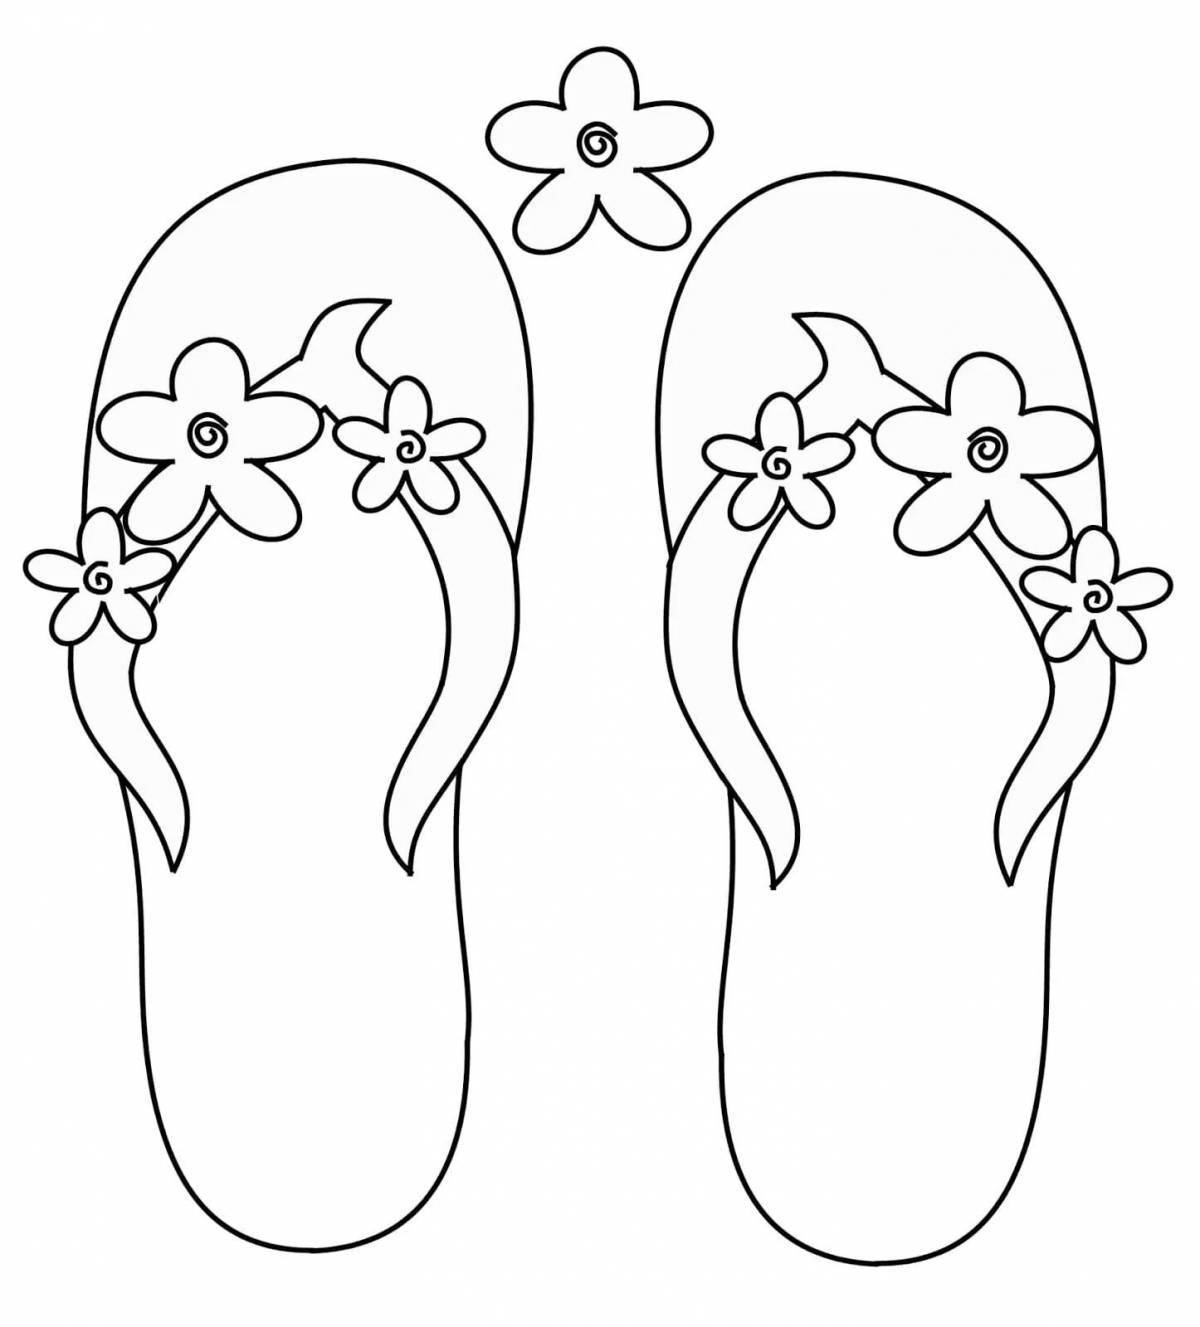 Coloring page nice shoes for kids 3-4 years old